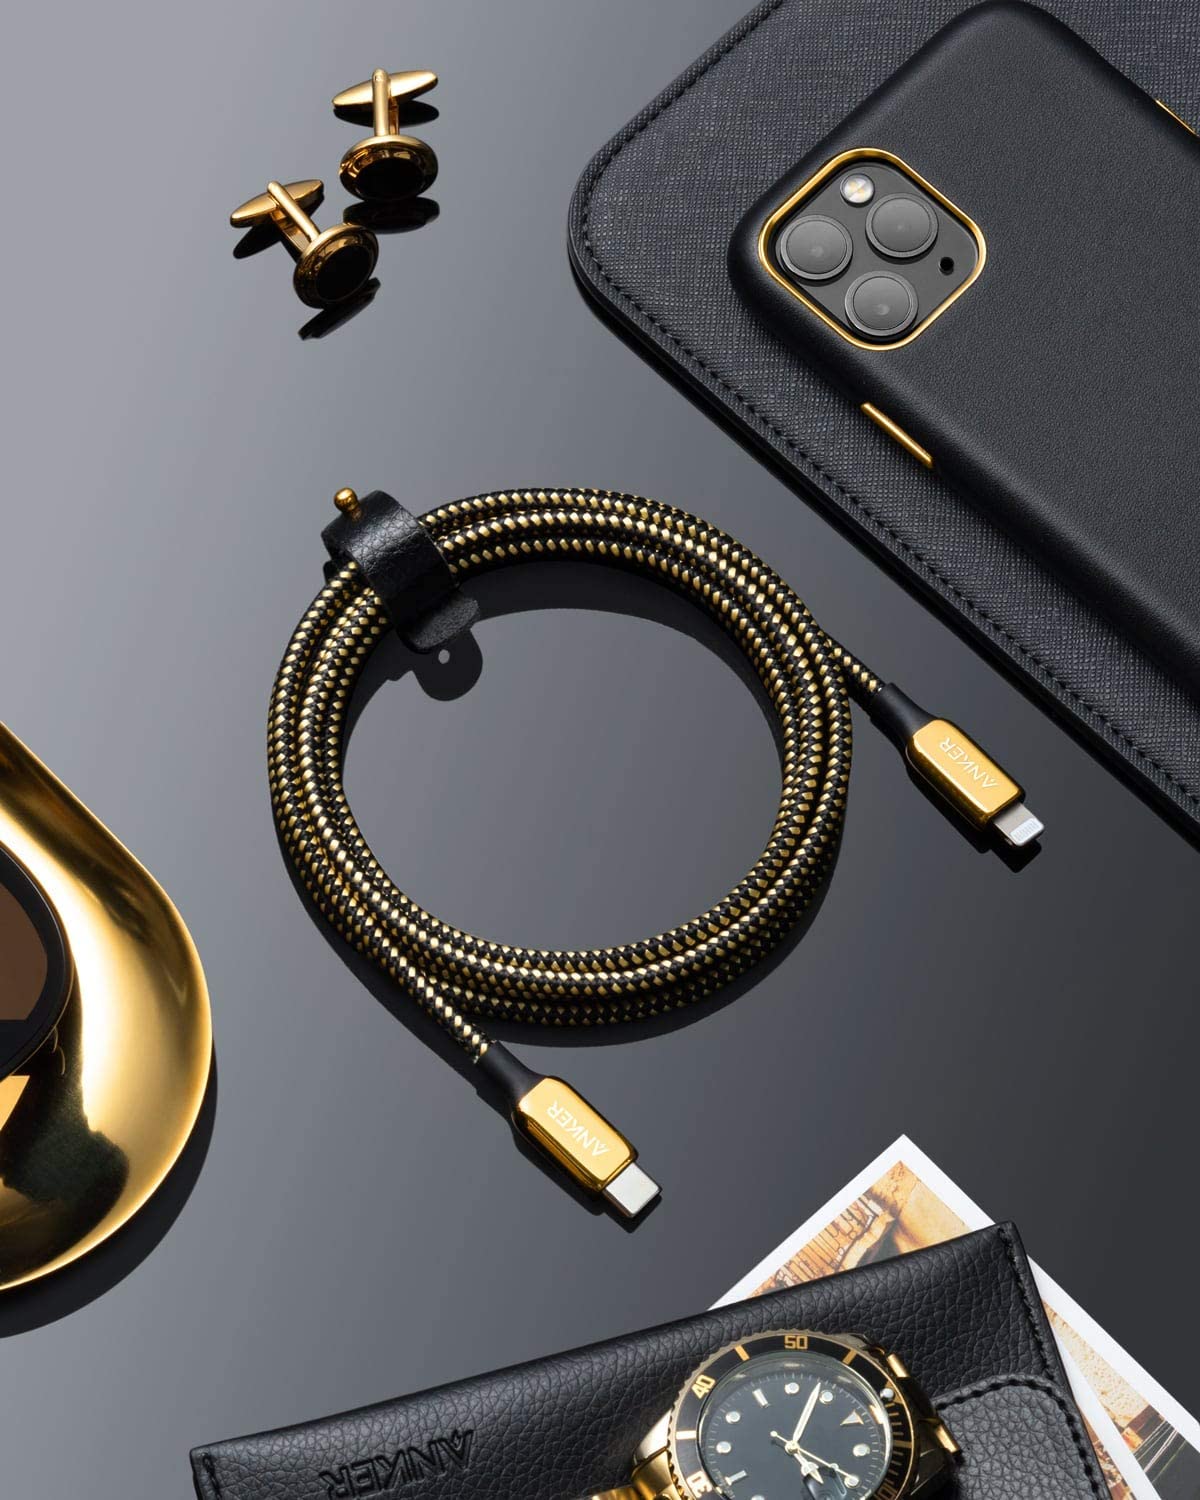 https://www.imore.com/sites/imore.com/files/styles/large/public/field/image/2020/05/anker-powerline-iii-24k-gold-edition-lifestyle.jpg?itok=ePZywL71